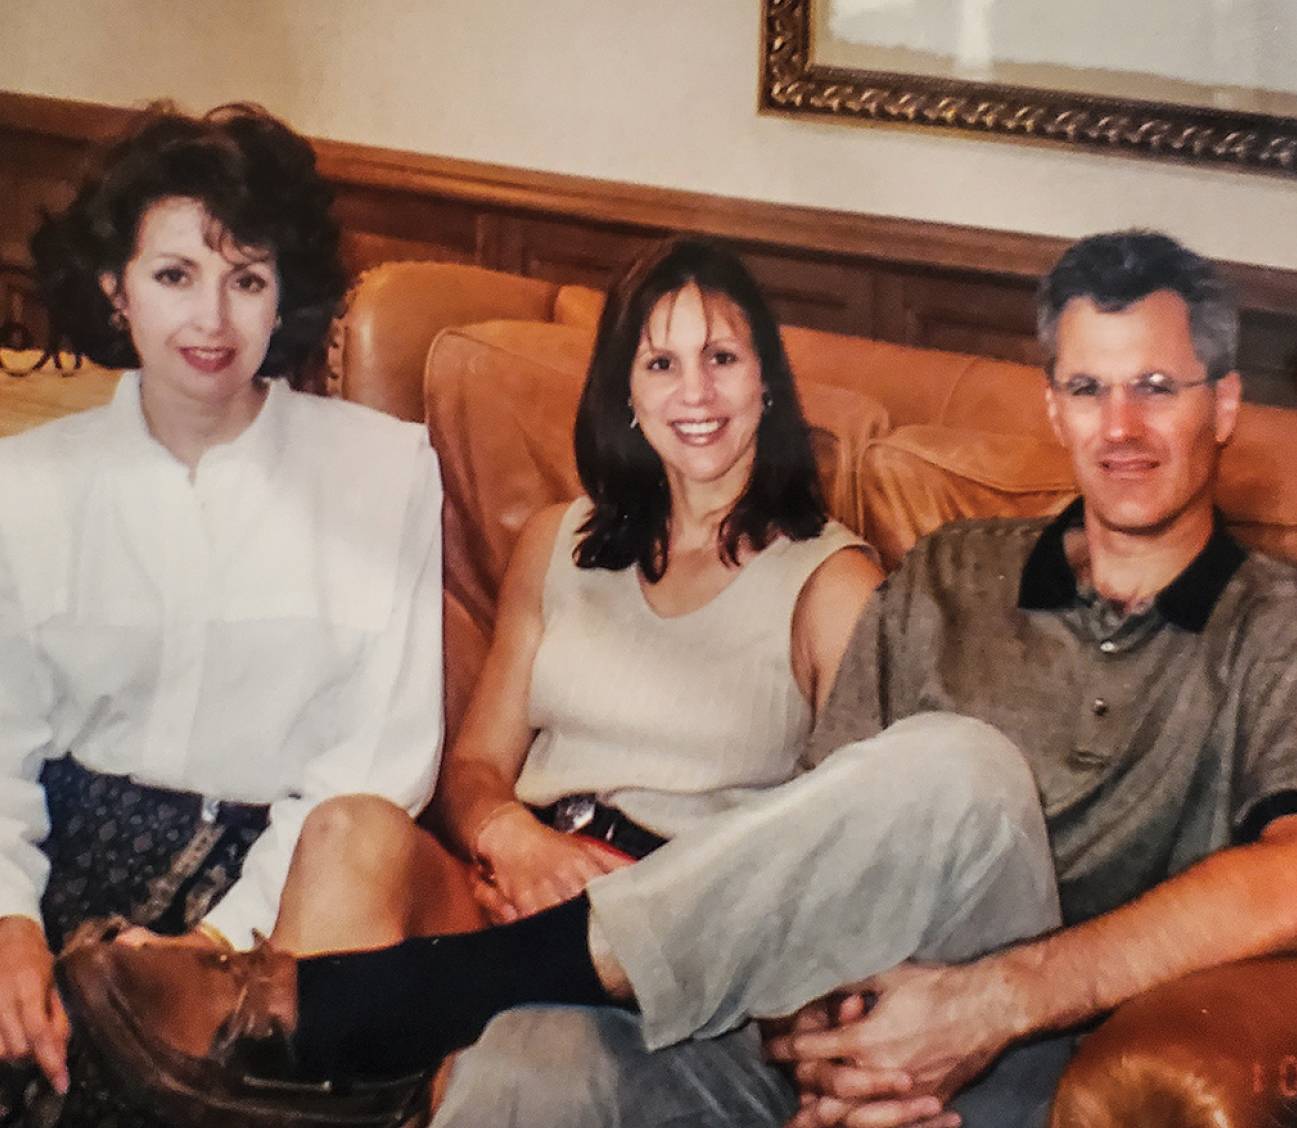 three people smiling while sitting on couch